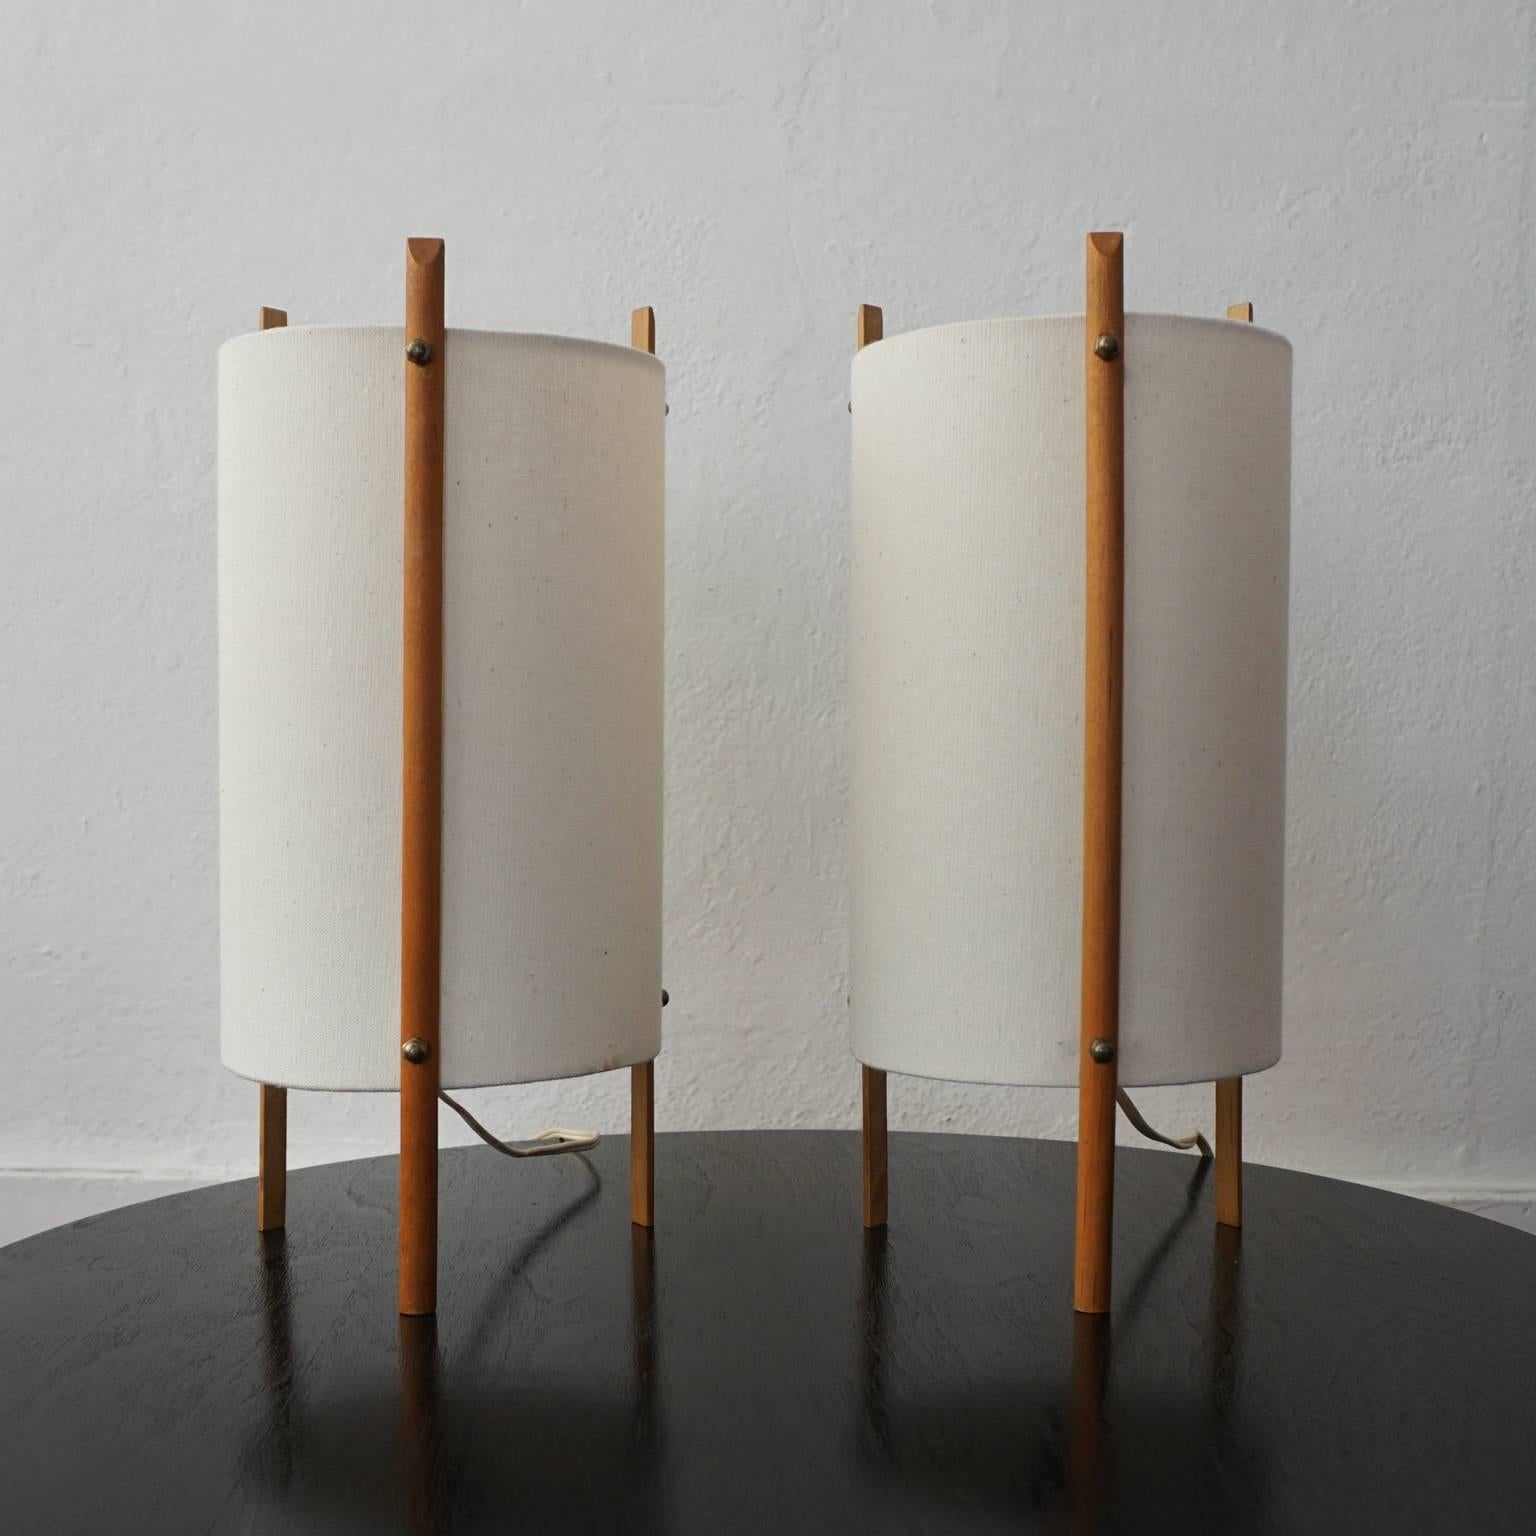 A pair of 1950s cylinder lamps. Teak tripod legs with brass fittings and natural linen shades. Made in Japan.